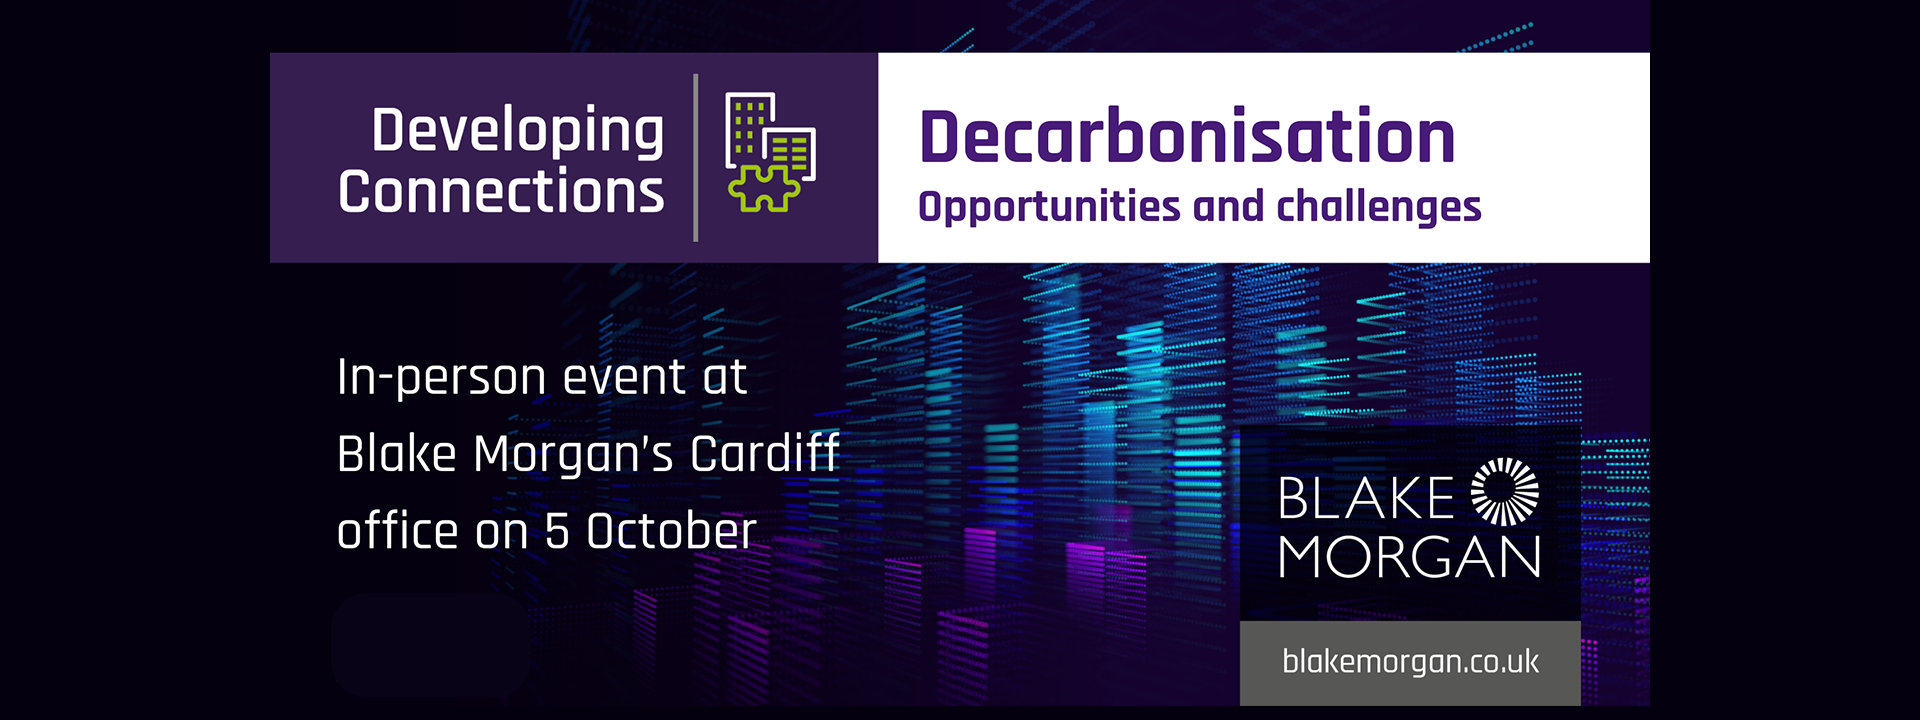 Developing connection event: Decarbonisation